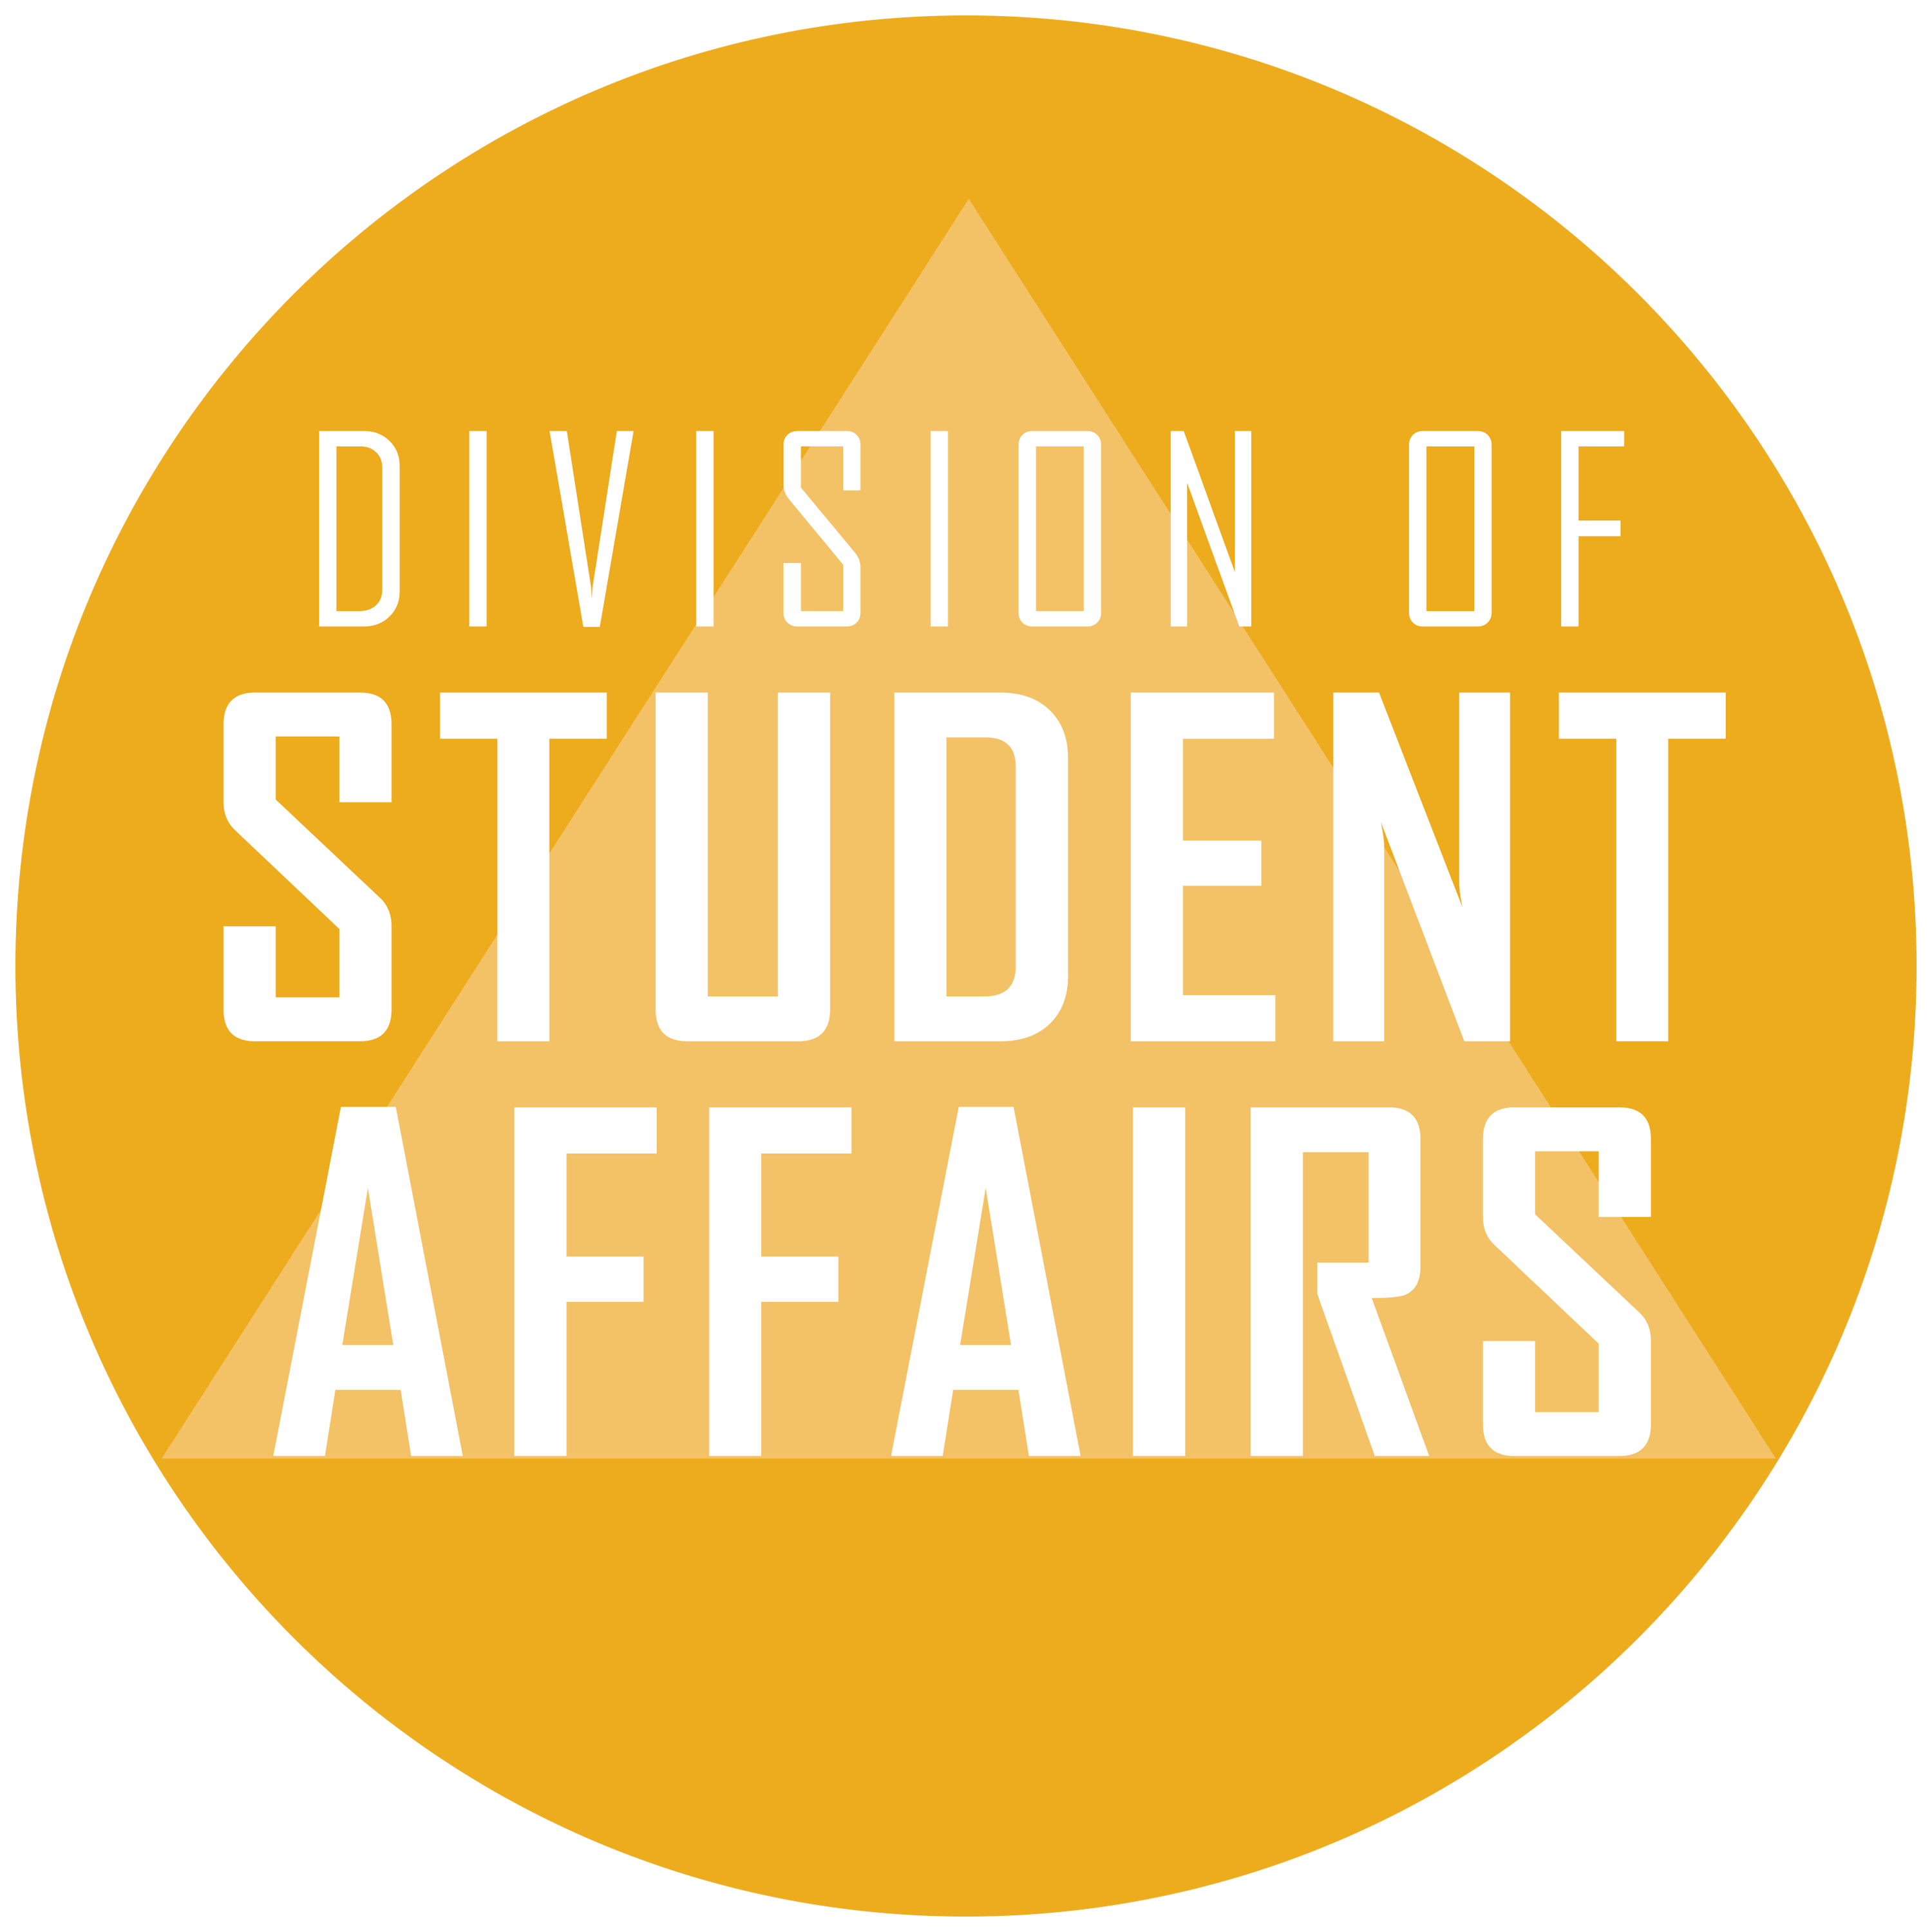 Division of Student Affairs text within a gold circle with a background of a triangle/pyramid.